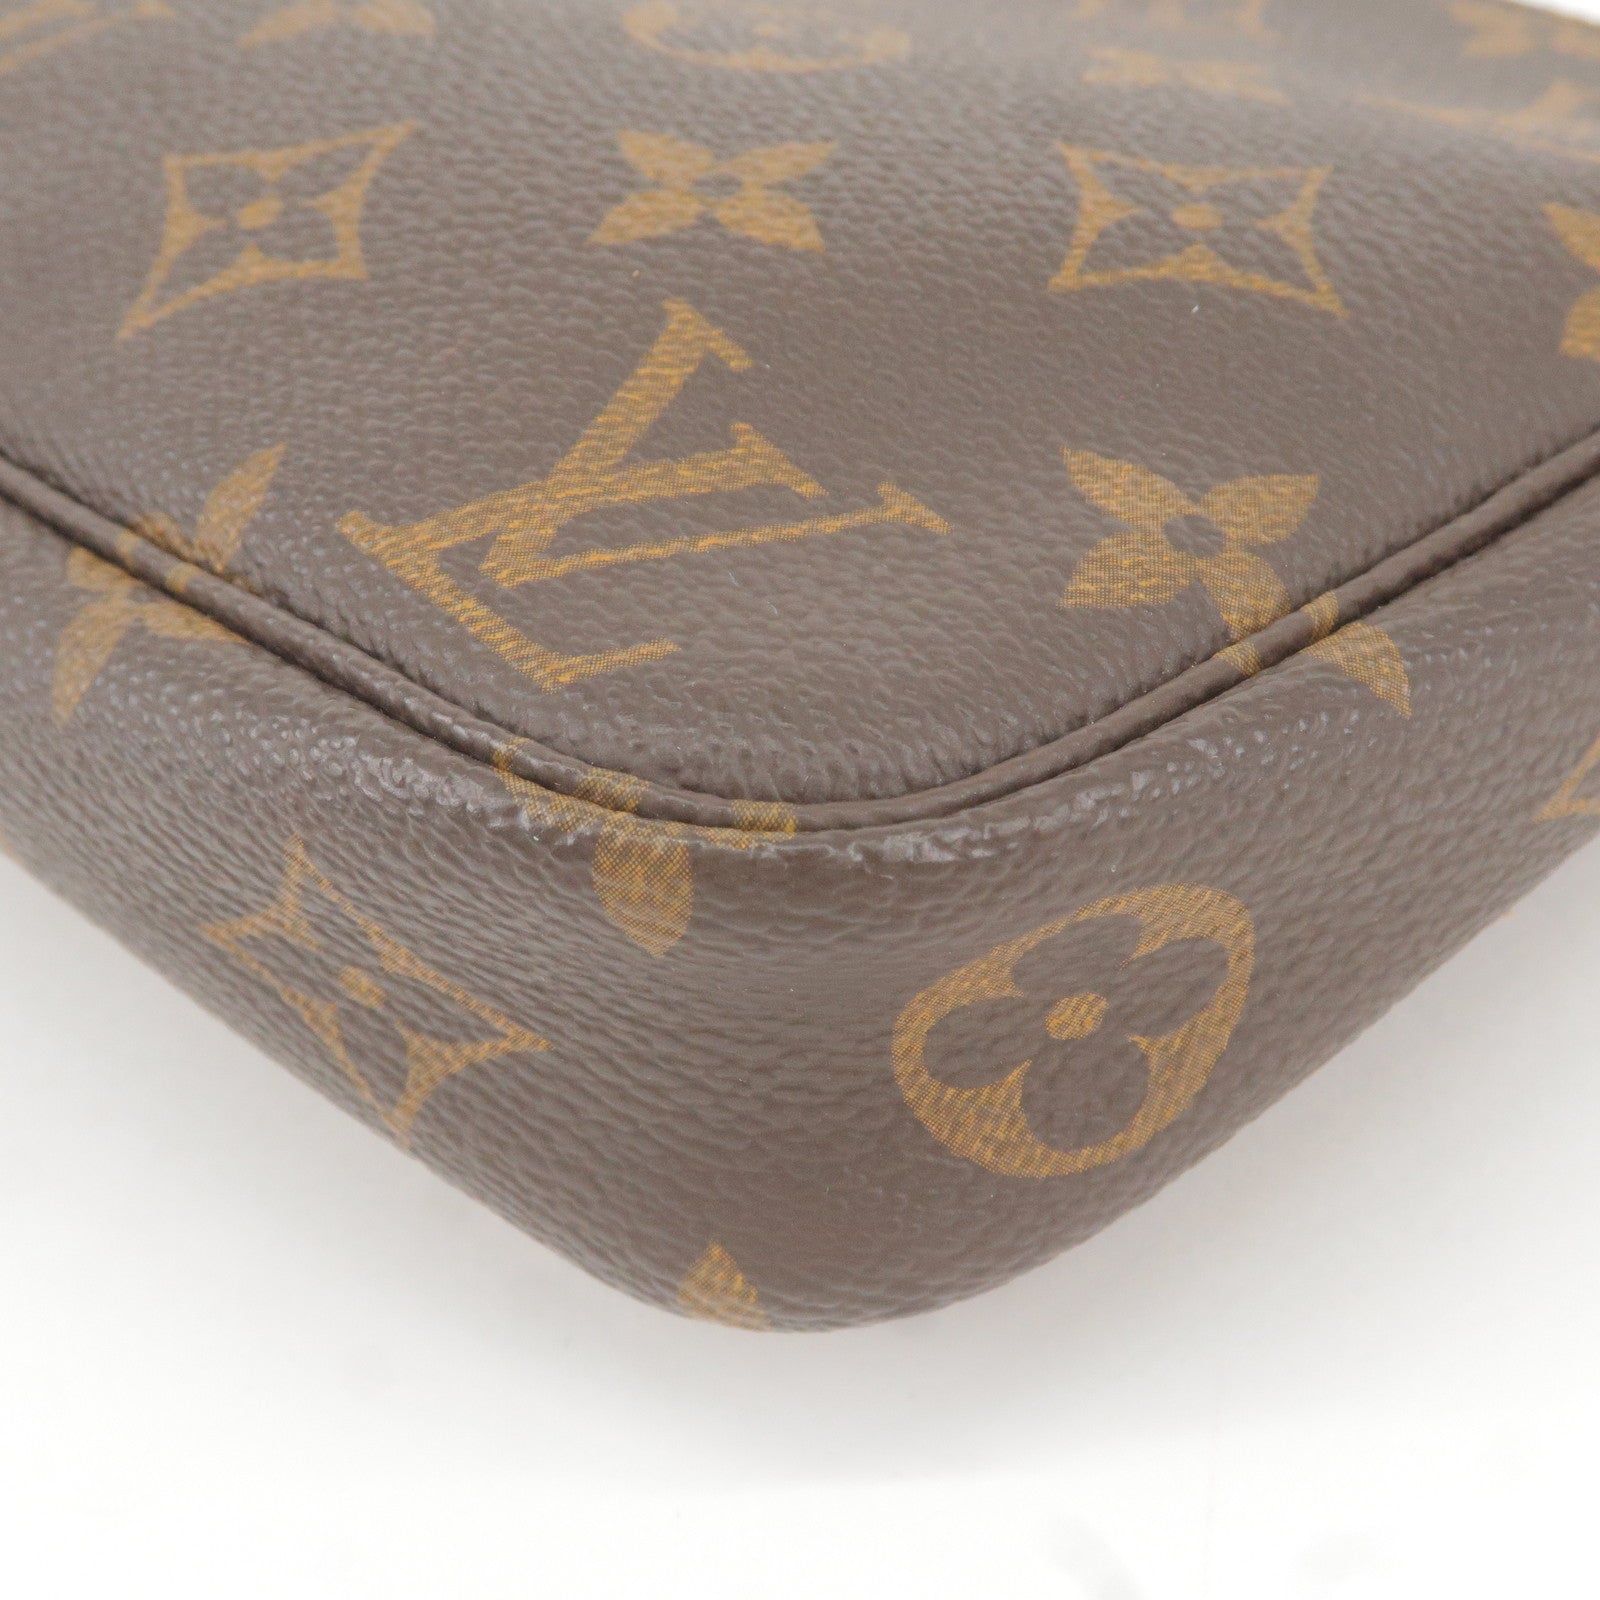 Louis Vuitton Hobo Cruiser PM the Virgil Abloh 'This is Not Monogram  Collection